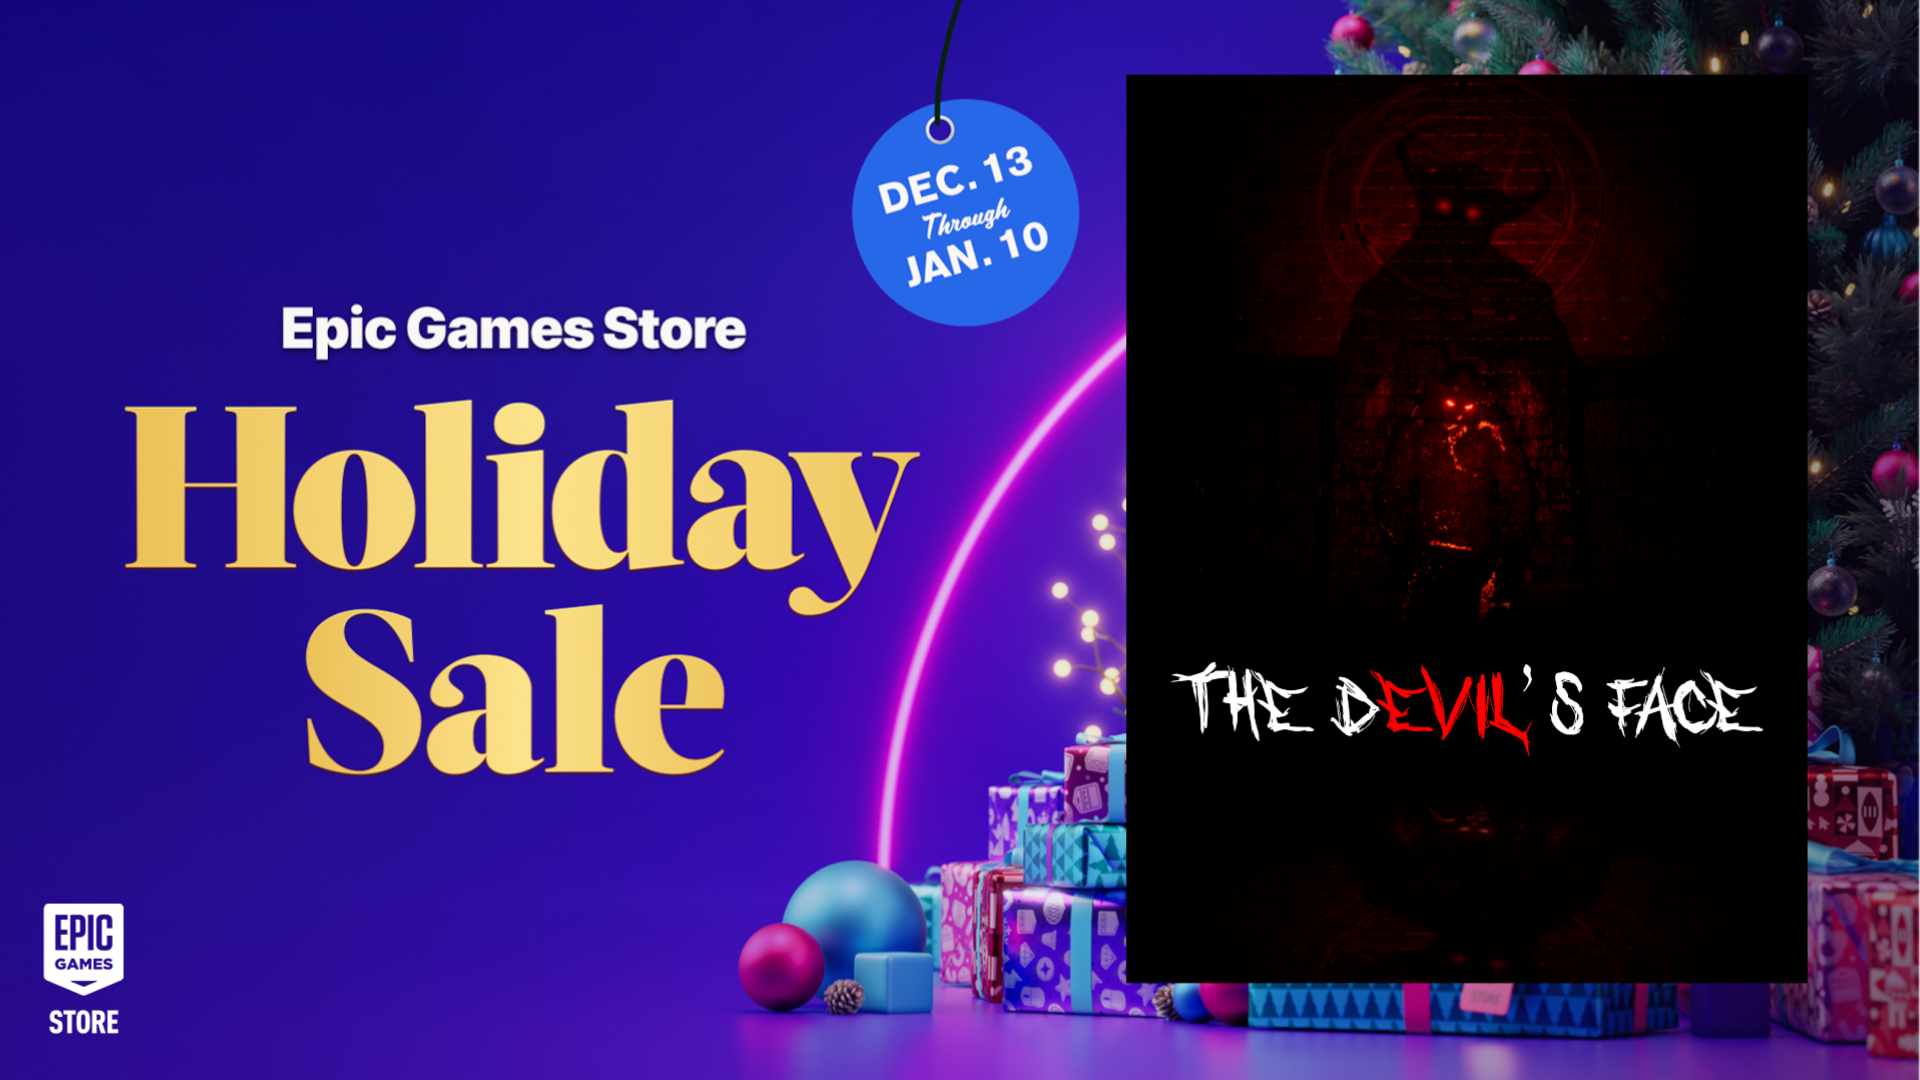 The Devil’s Face Now On Sale at Epic Games Store!